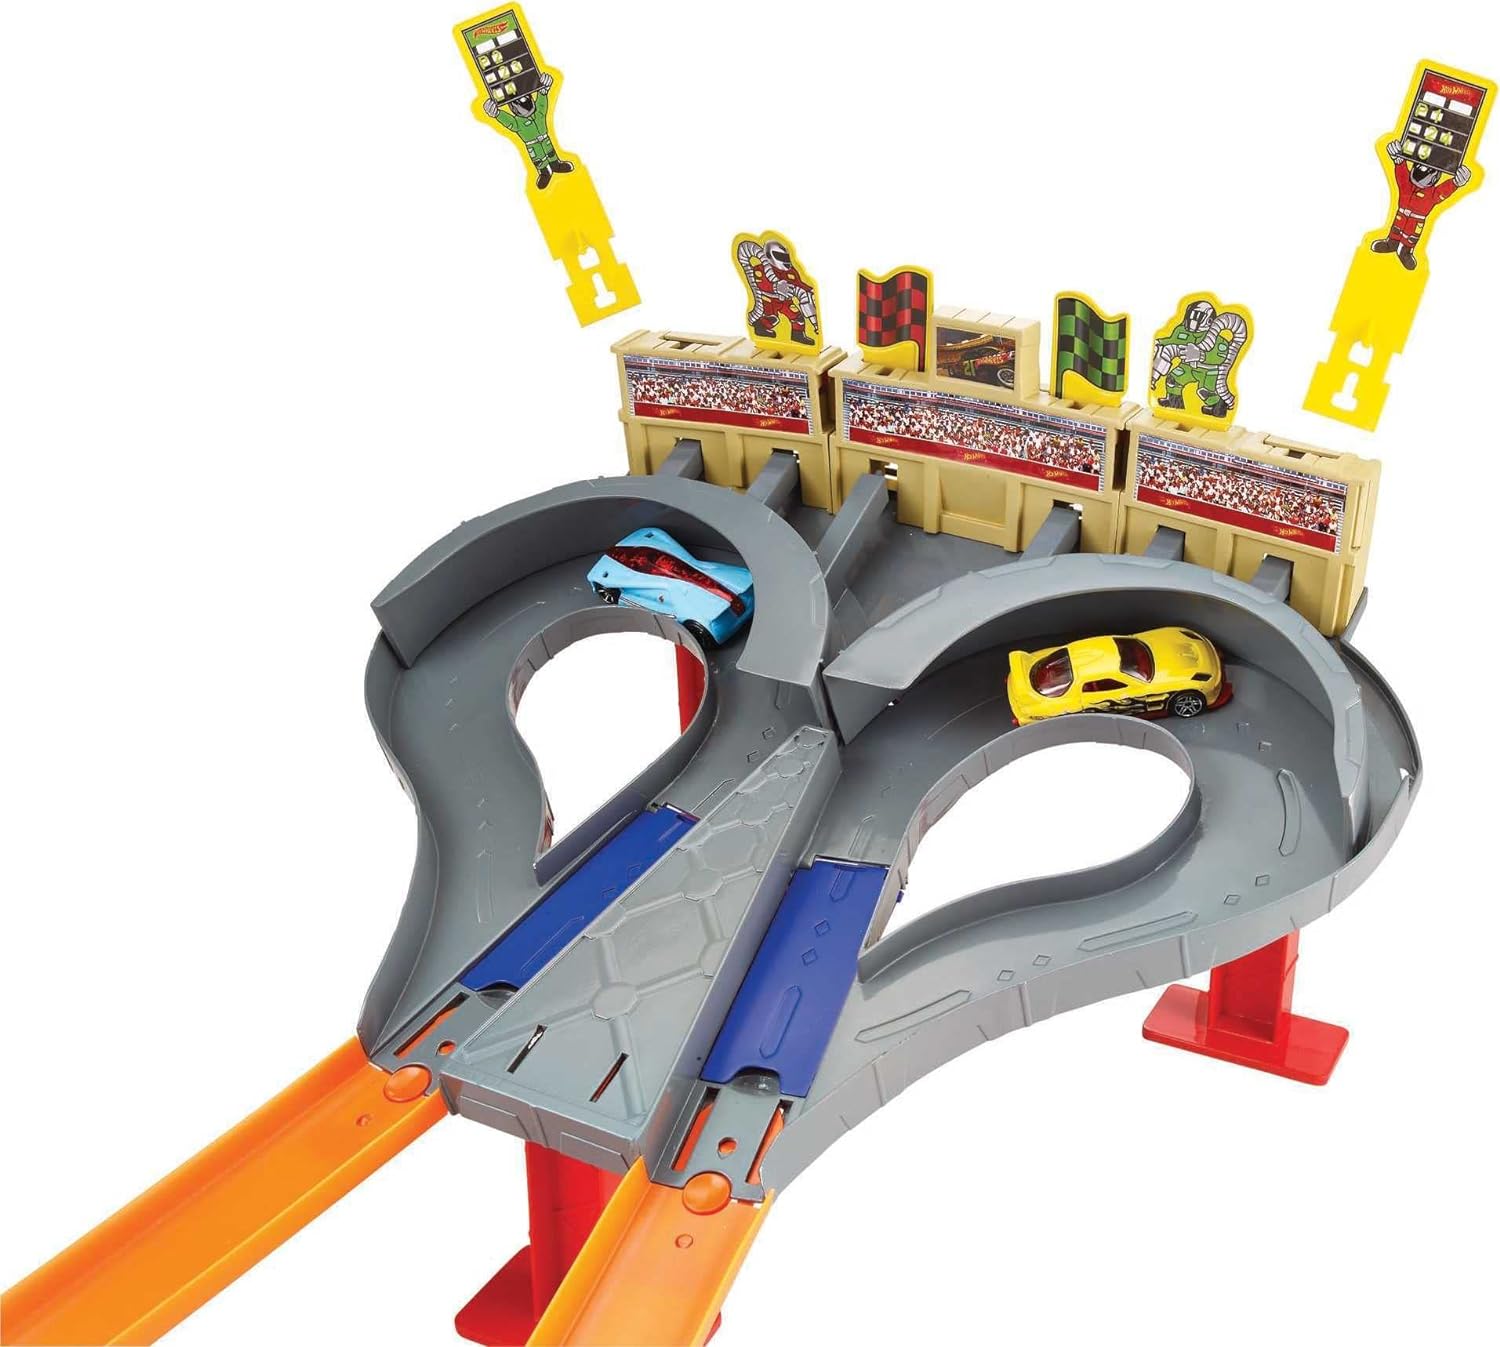 Hot Wheels Super Speed Blastway Track Set, 1 Hot Wheels Car, Dual-Track Racing, 1 or 2 Player, Connect to Other Sets, Toy for Kids 4 Years Old & Up (Amazon Exclusive)